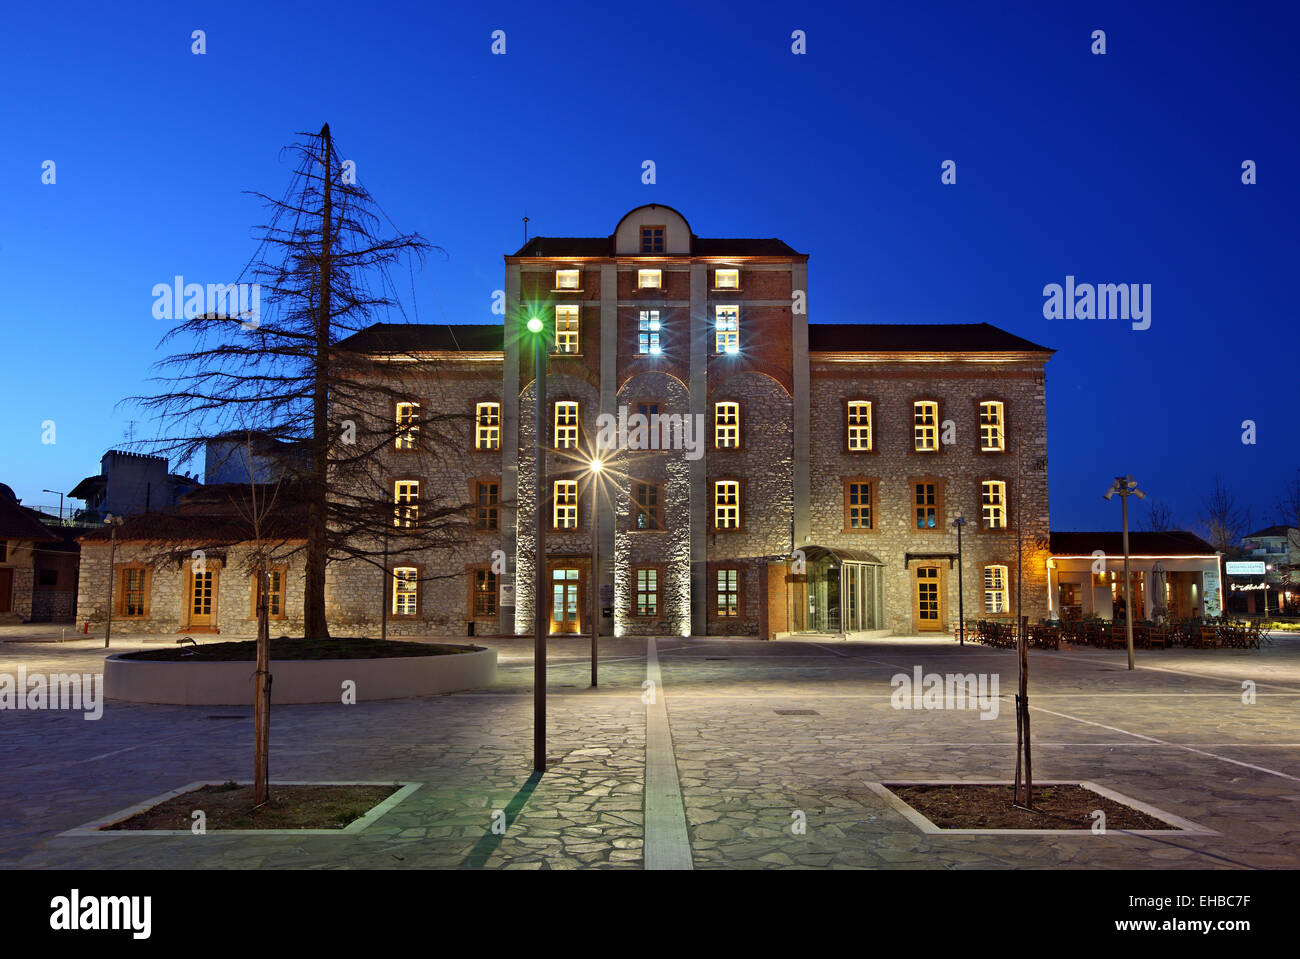 The 'Mill of Pappas', one of the most impressive buildings of Larissa city, Thessaly, Greece. Stock Photo